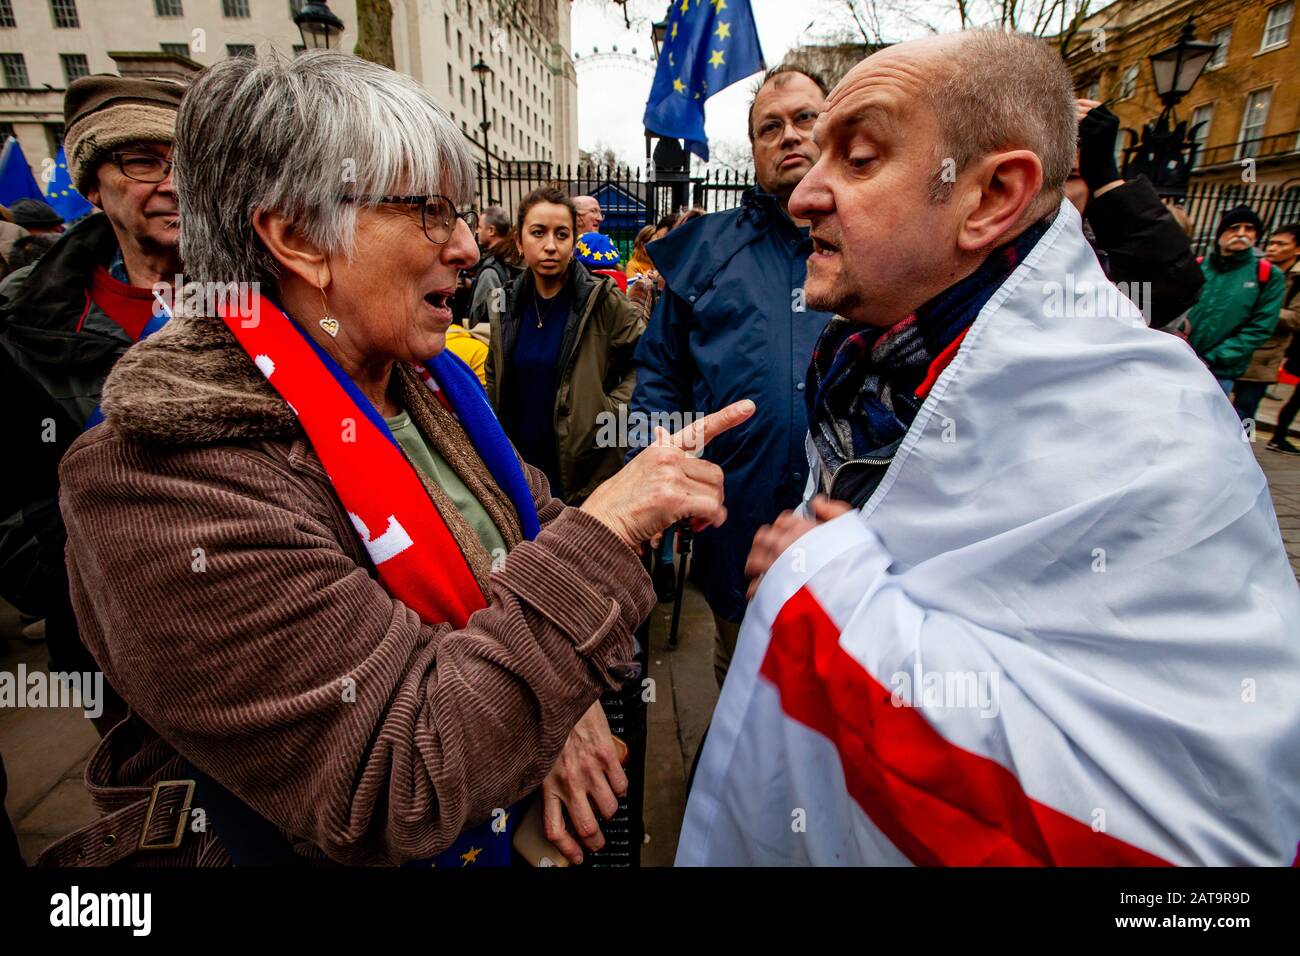 London, UK. 31st Jan, 2020. A confrontation beween a remainer and Brexit supporter near Parliament Square, London as Brexit supporters gather to celebrate Britain leaving the EU. Credit: Grant Rooney/Alamy Live News Stock Photo